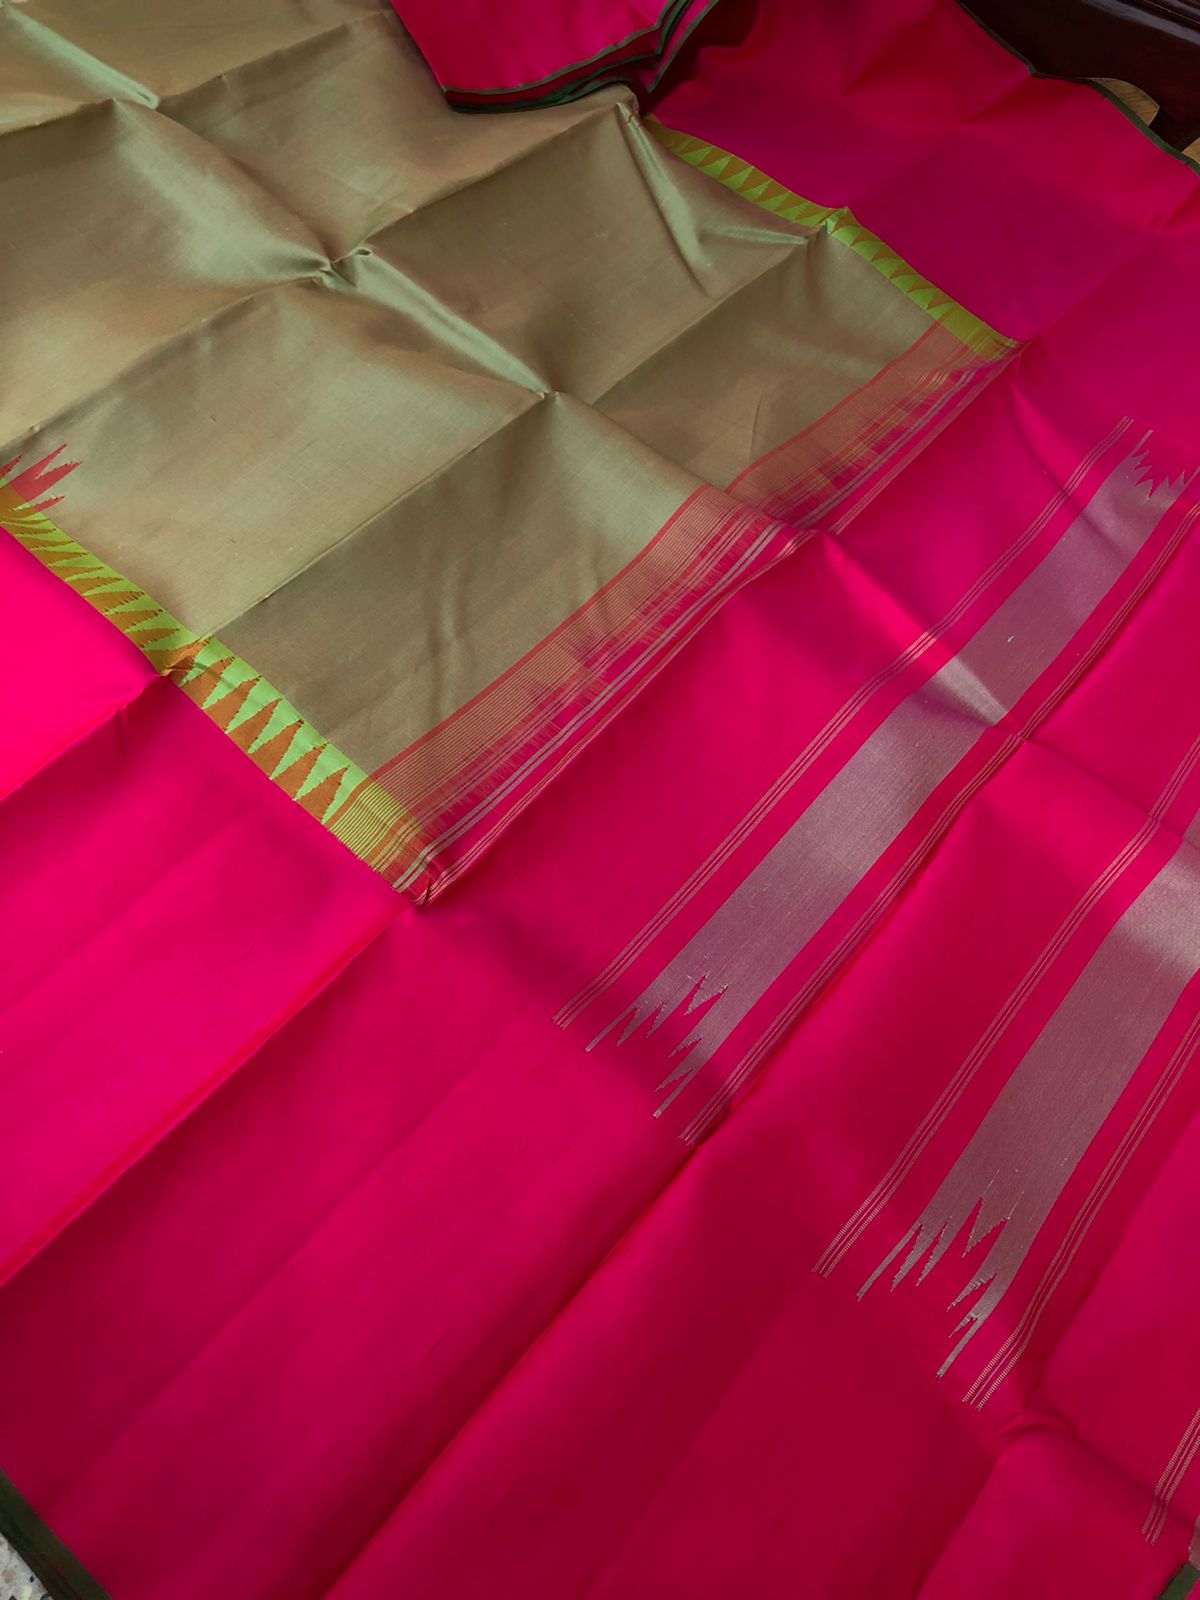 Connected by Korvai on Kanchivaram - absolutely a unusual dual tone maanthuli oosi stripes woven body with broad deep pink korvai woven borders